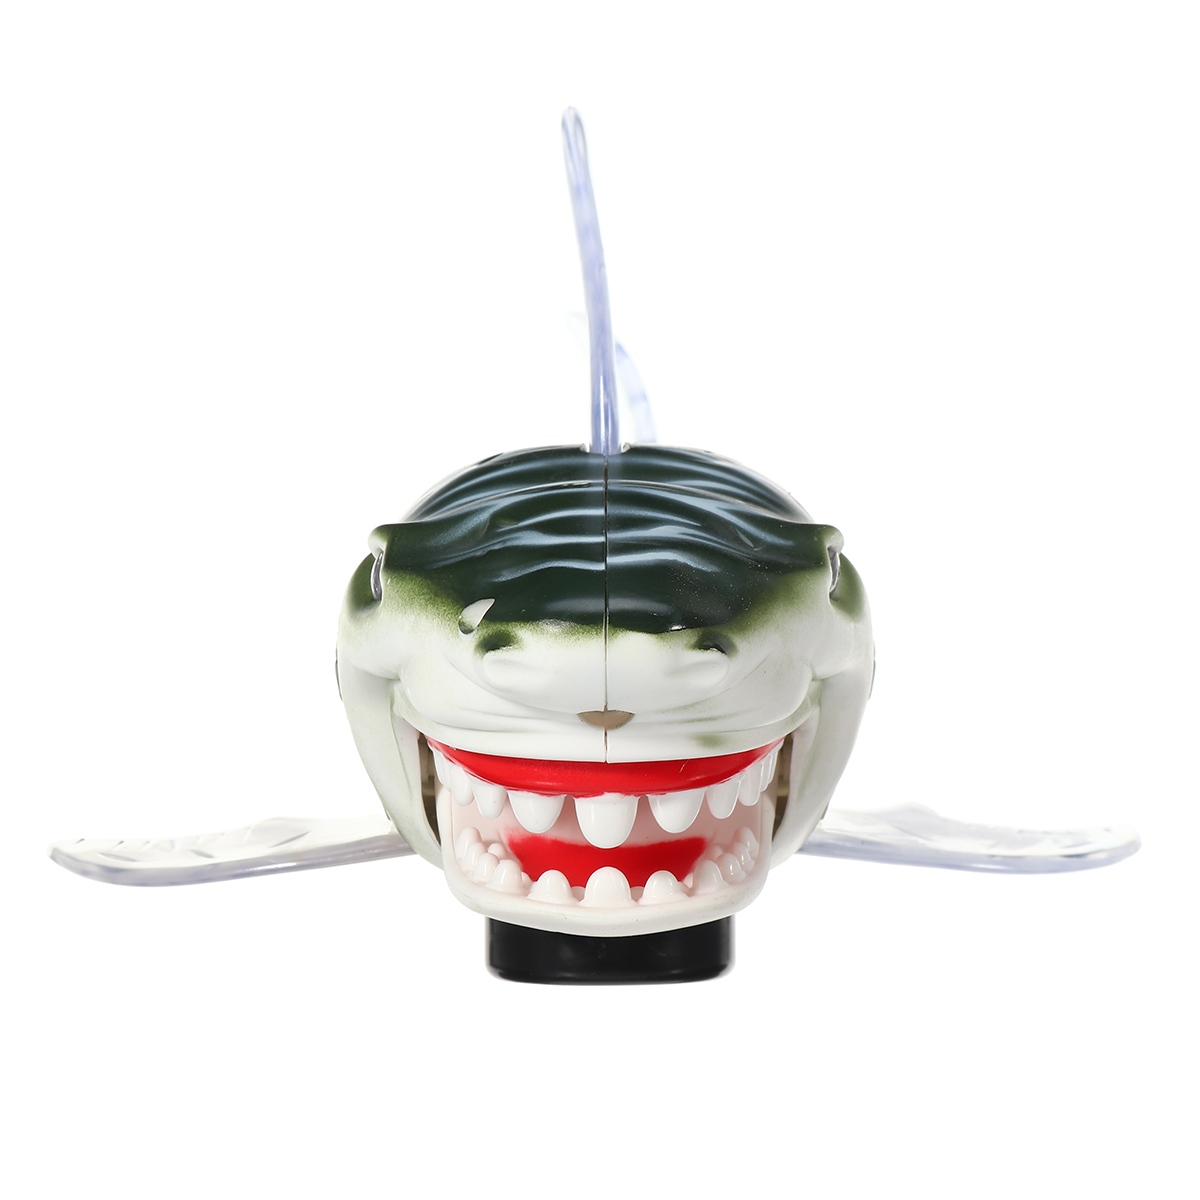 Electric-Projection-Light-Sound-Shark-Walking-Animal-Educational-Toys-for-Kids-Gift-1678213-6